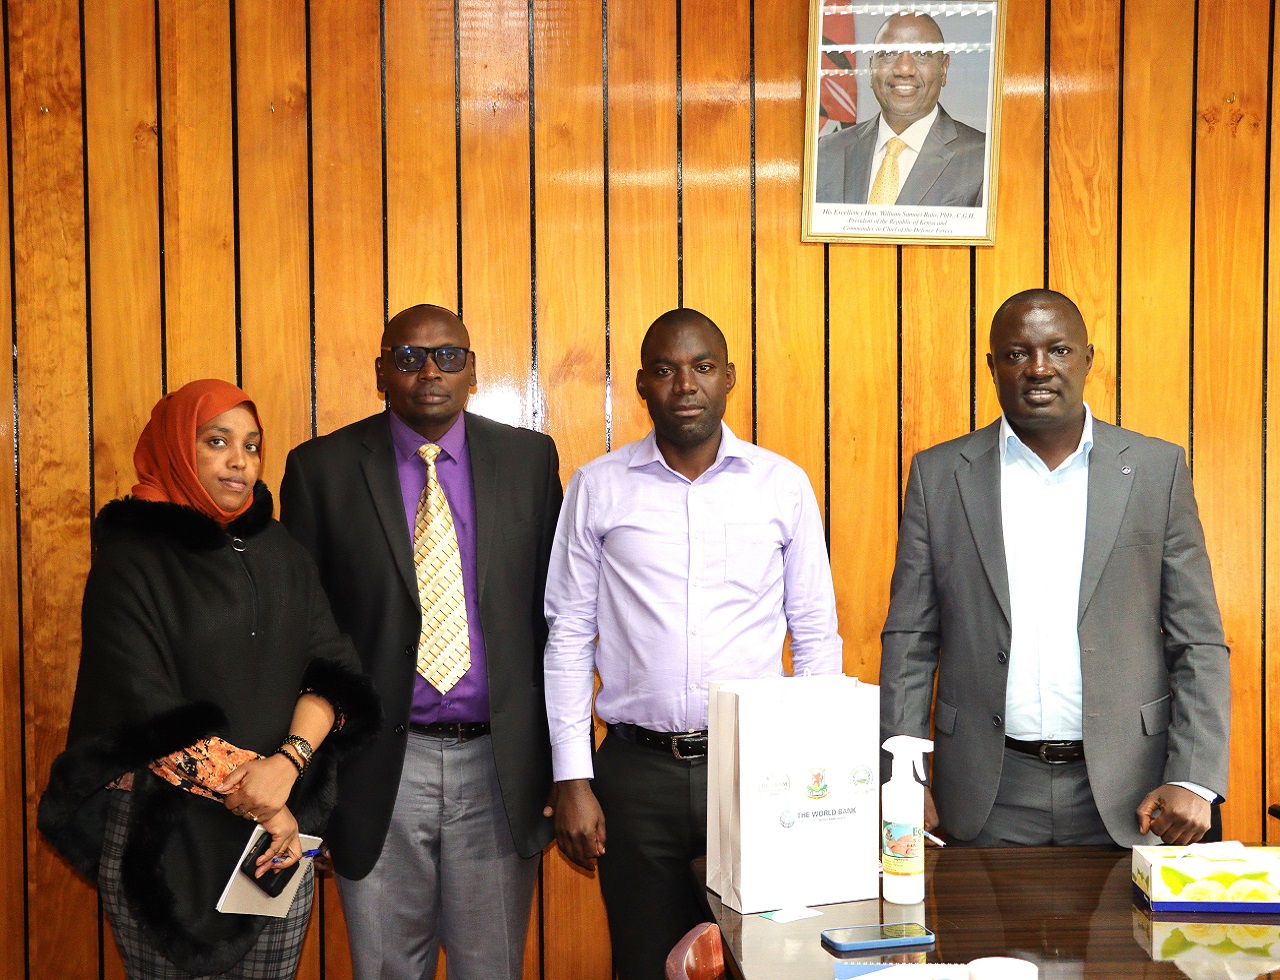  Egerton University received guests from the University Funding Board